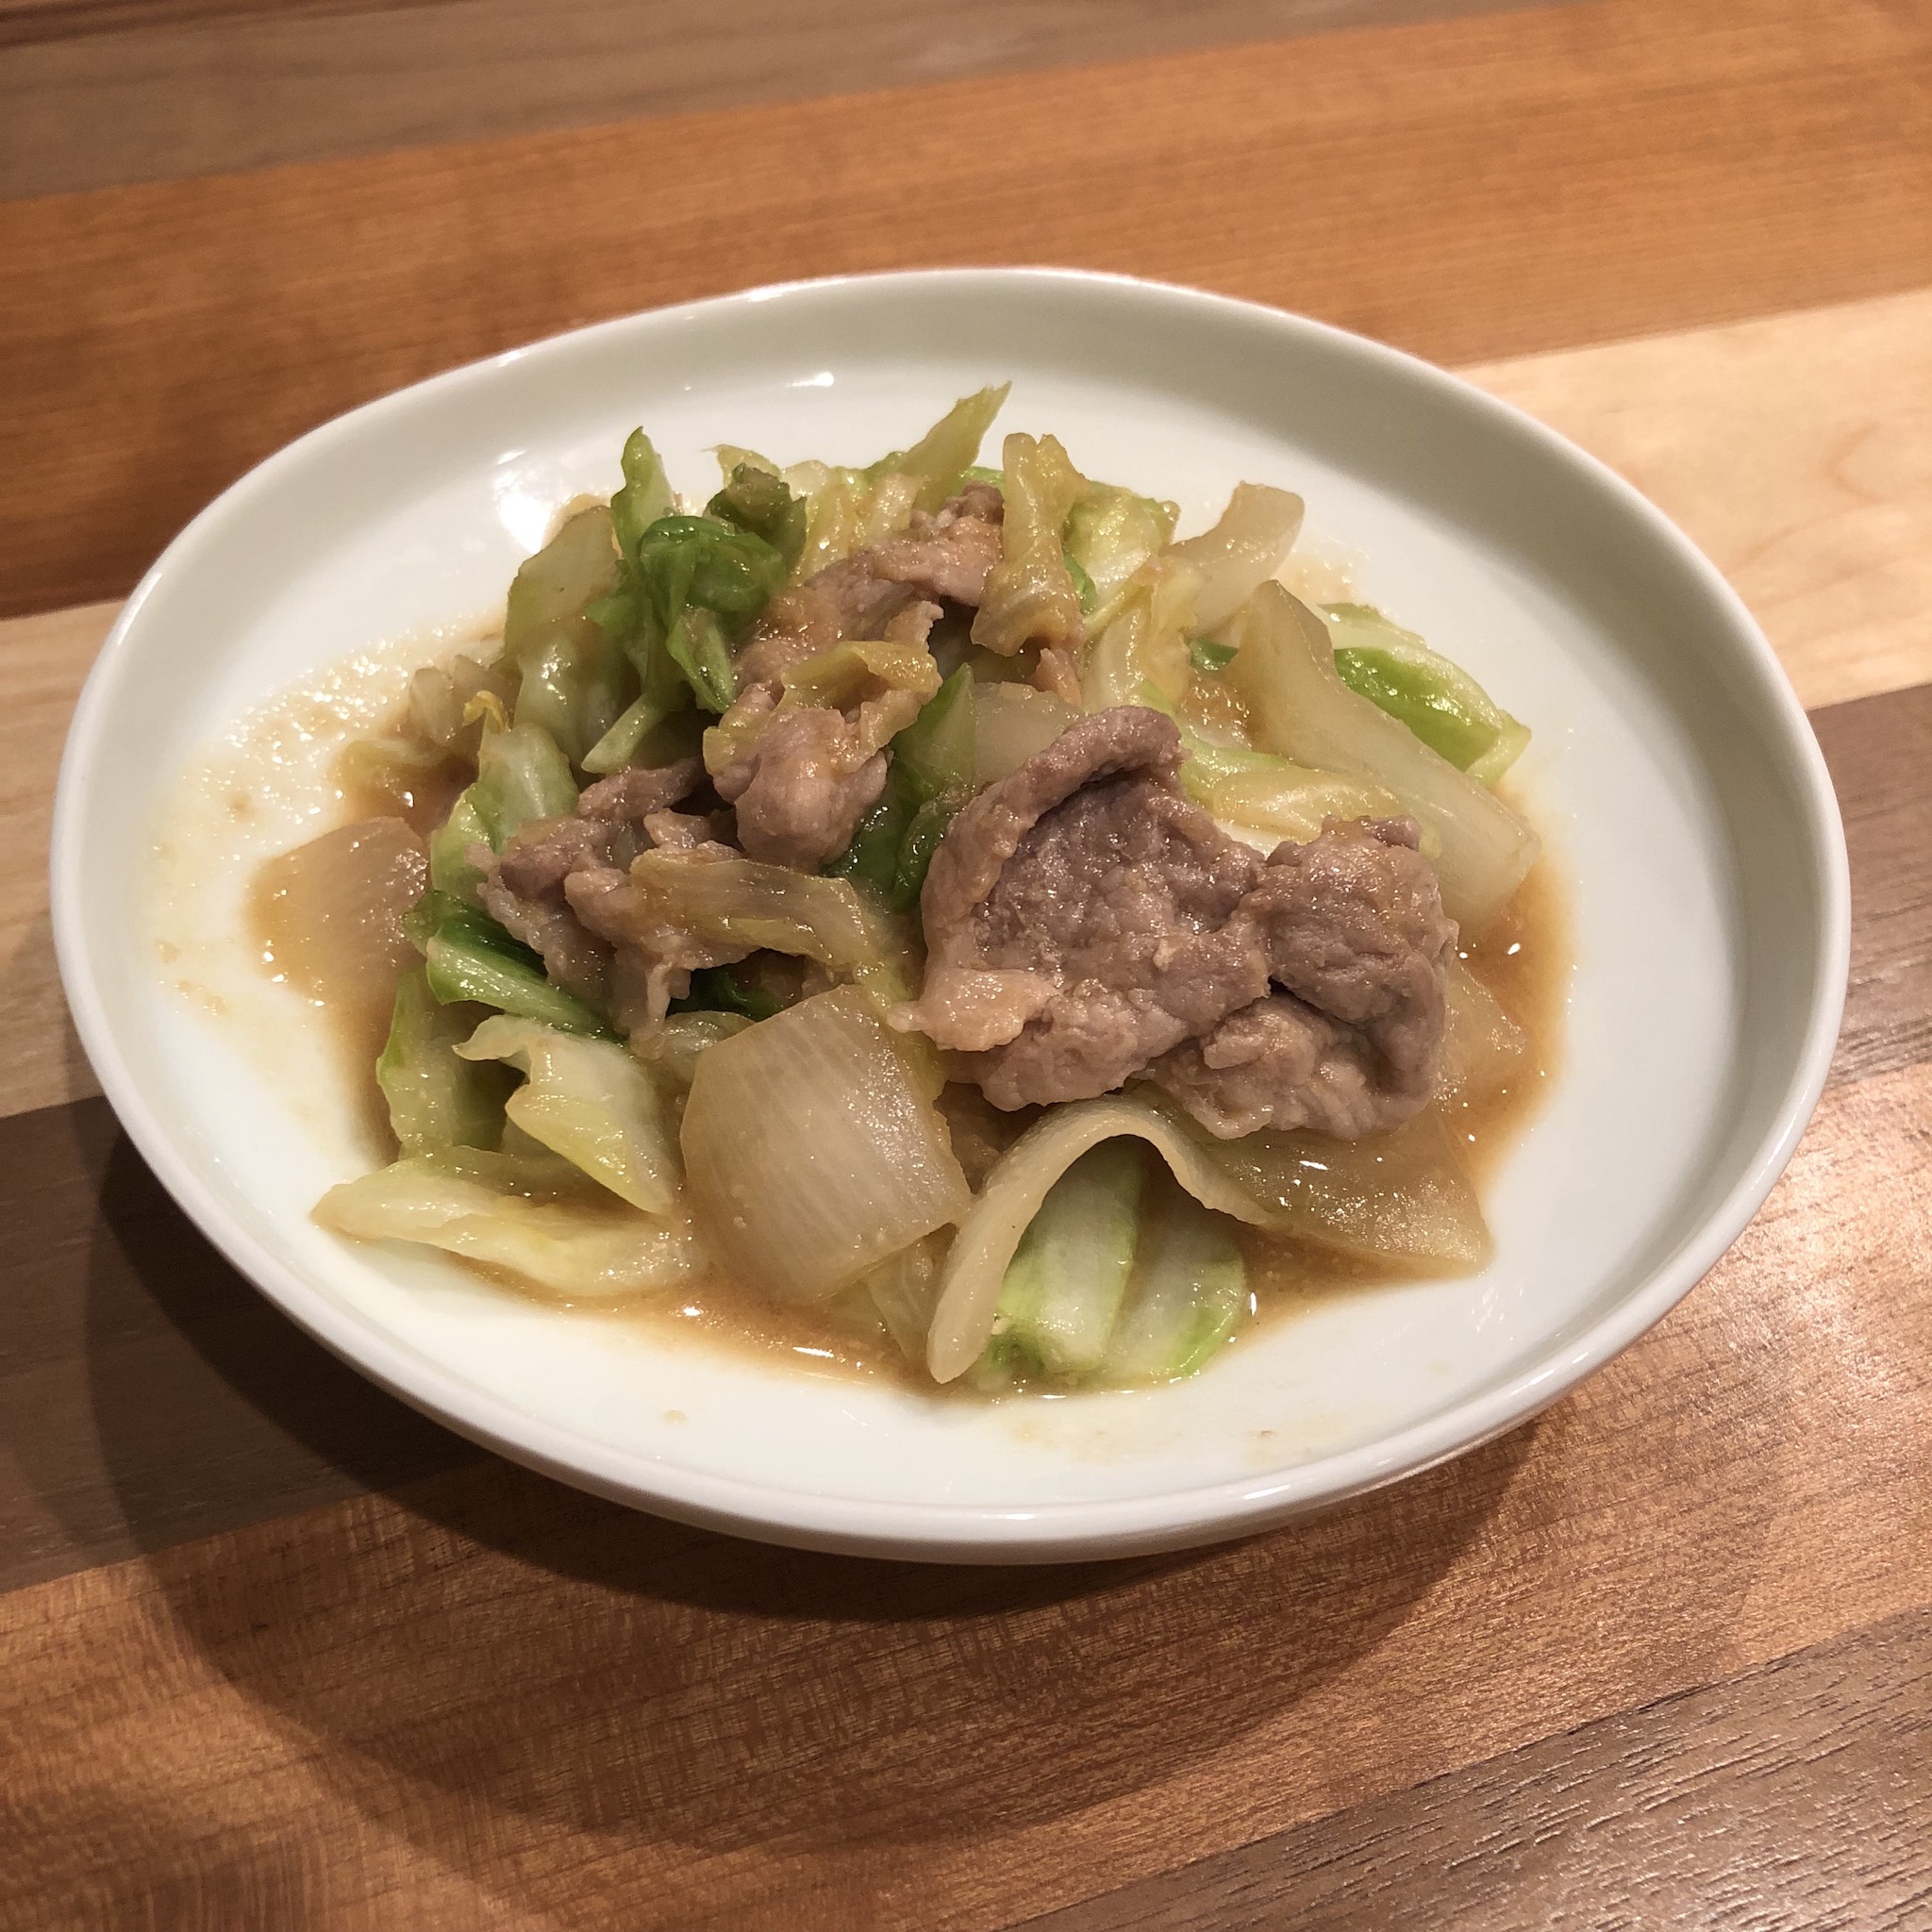 PORK & CABBAGE STIR-FRY WITH GINGER MISO SAUCE